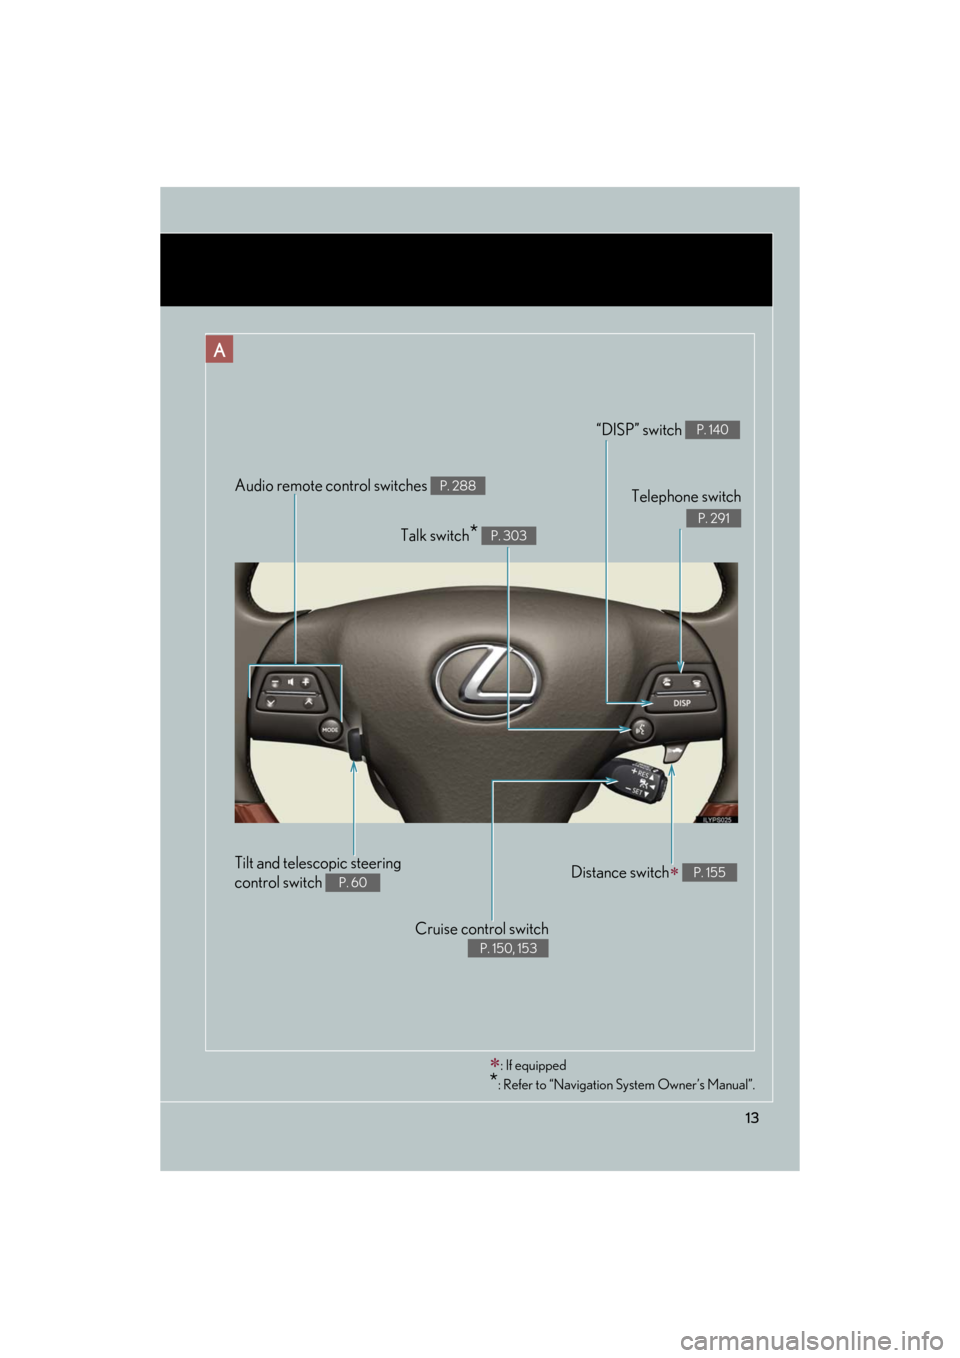 Lexus GS350 2008  Specifications / LEXUS 2008 GS460/350 OWNERS MANUAL (OM30A87U) 13
GS_G_U
May 13, 2008 5:14 pm
Audio remote control switches P. 288
Cruise control switch 
 
P. 150, 153
Telephone switch 
P. 291
“DISP” switch P. 140
Distance switch P. 155
Talk switch* P. 303